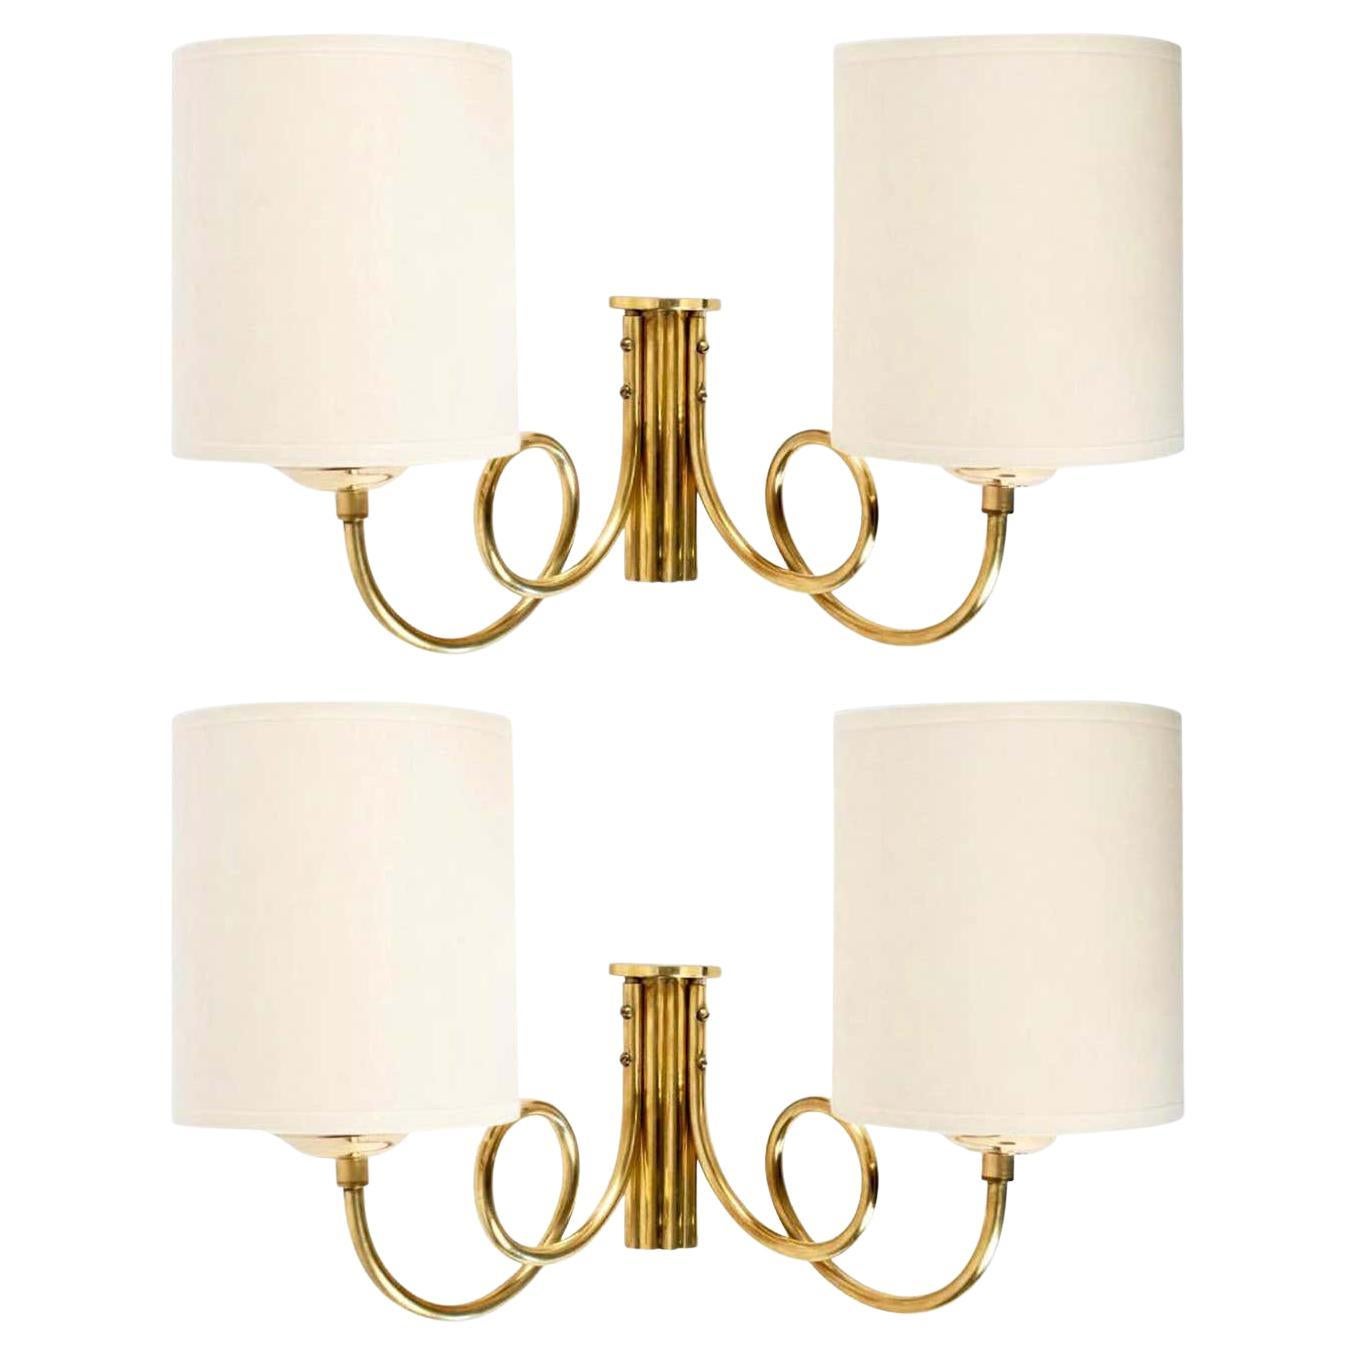 1950s Pair of Maison Lunel Sconces, Brass and Opaline Glass